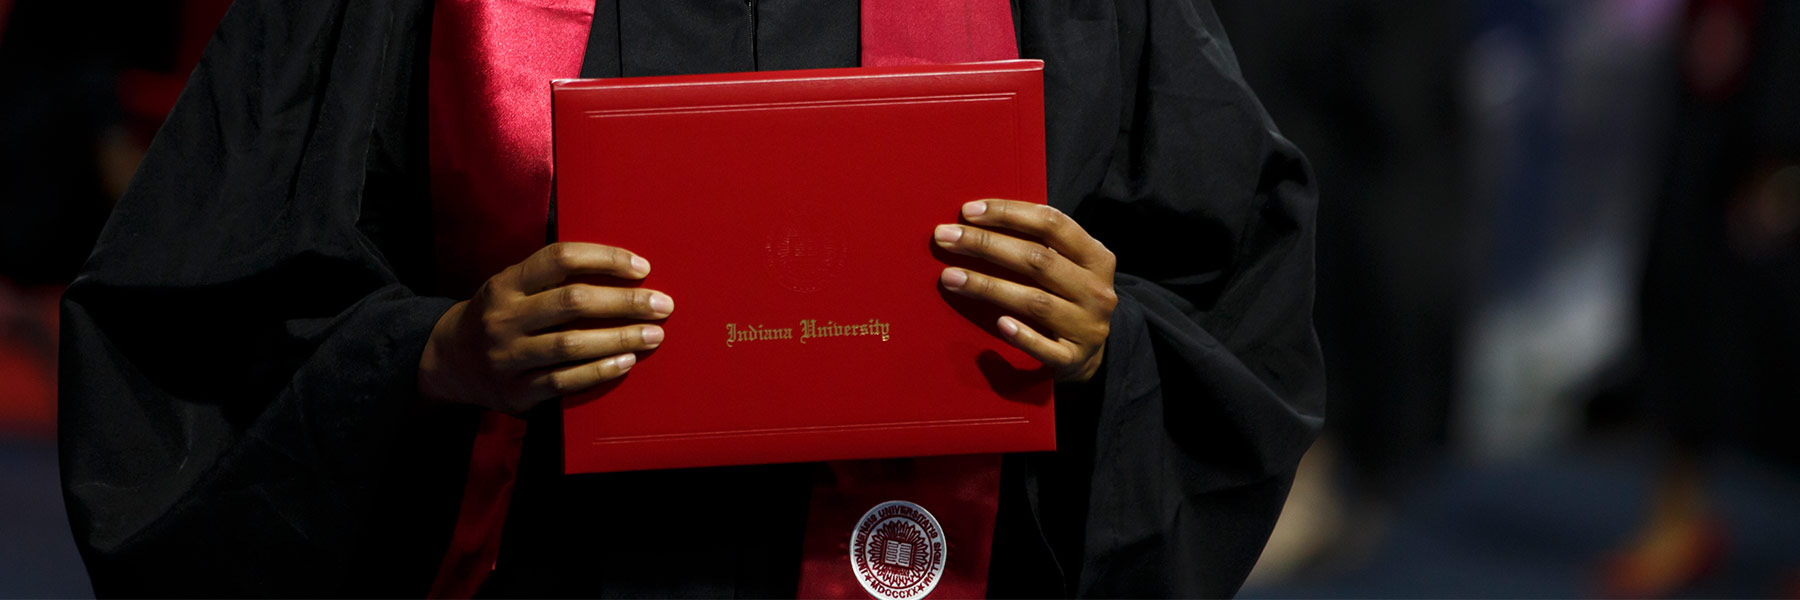 Hands holding a diploma cover